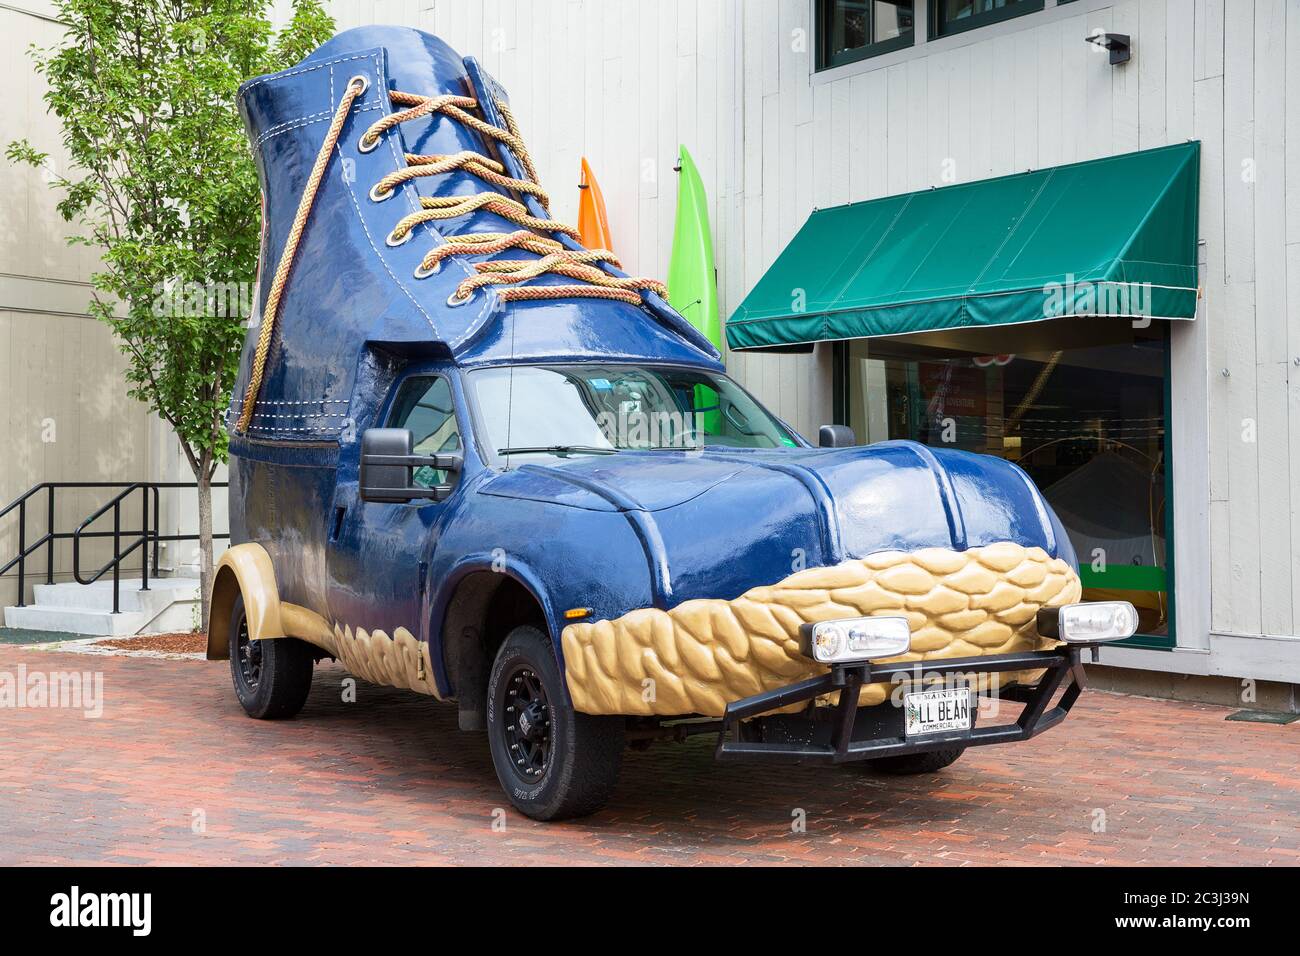 FREEPORT, MAINE, USA-AUG 31st, 2014: L.L. Bean is retail company founded in 1912 by Leon Leonwood Bean. A replica of its famous boot has been coverted Stock Photo